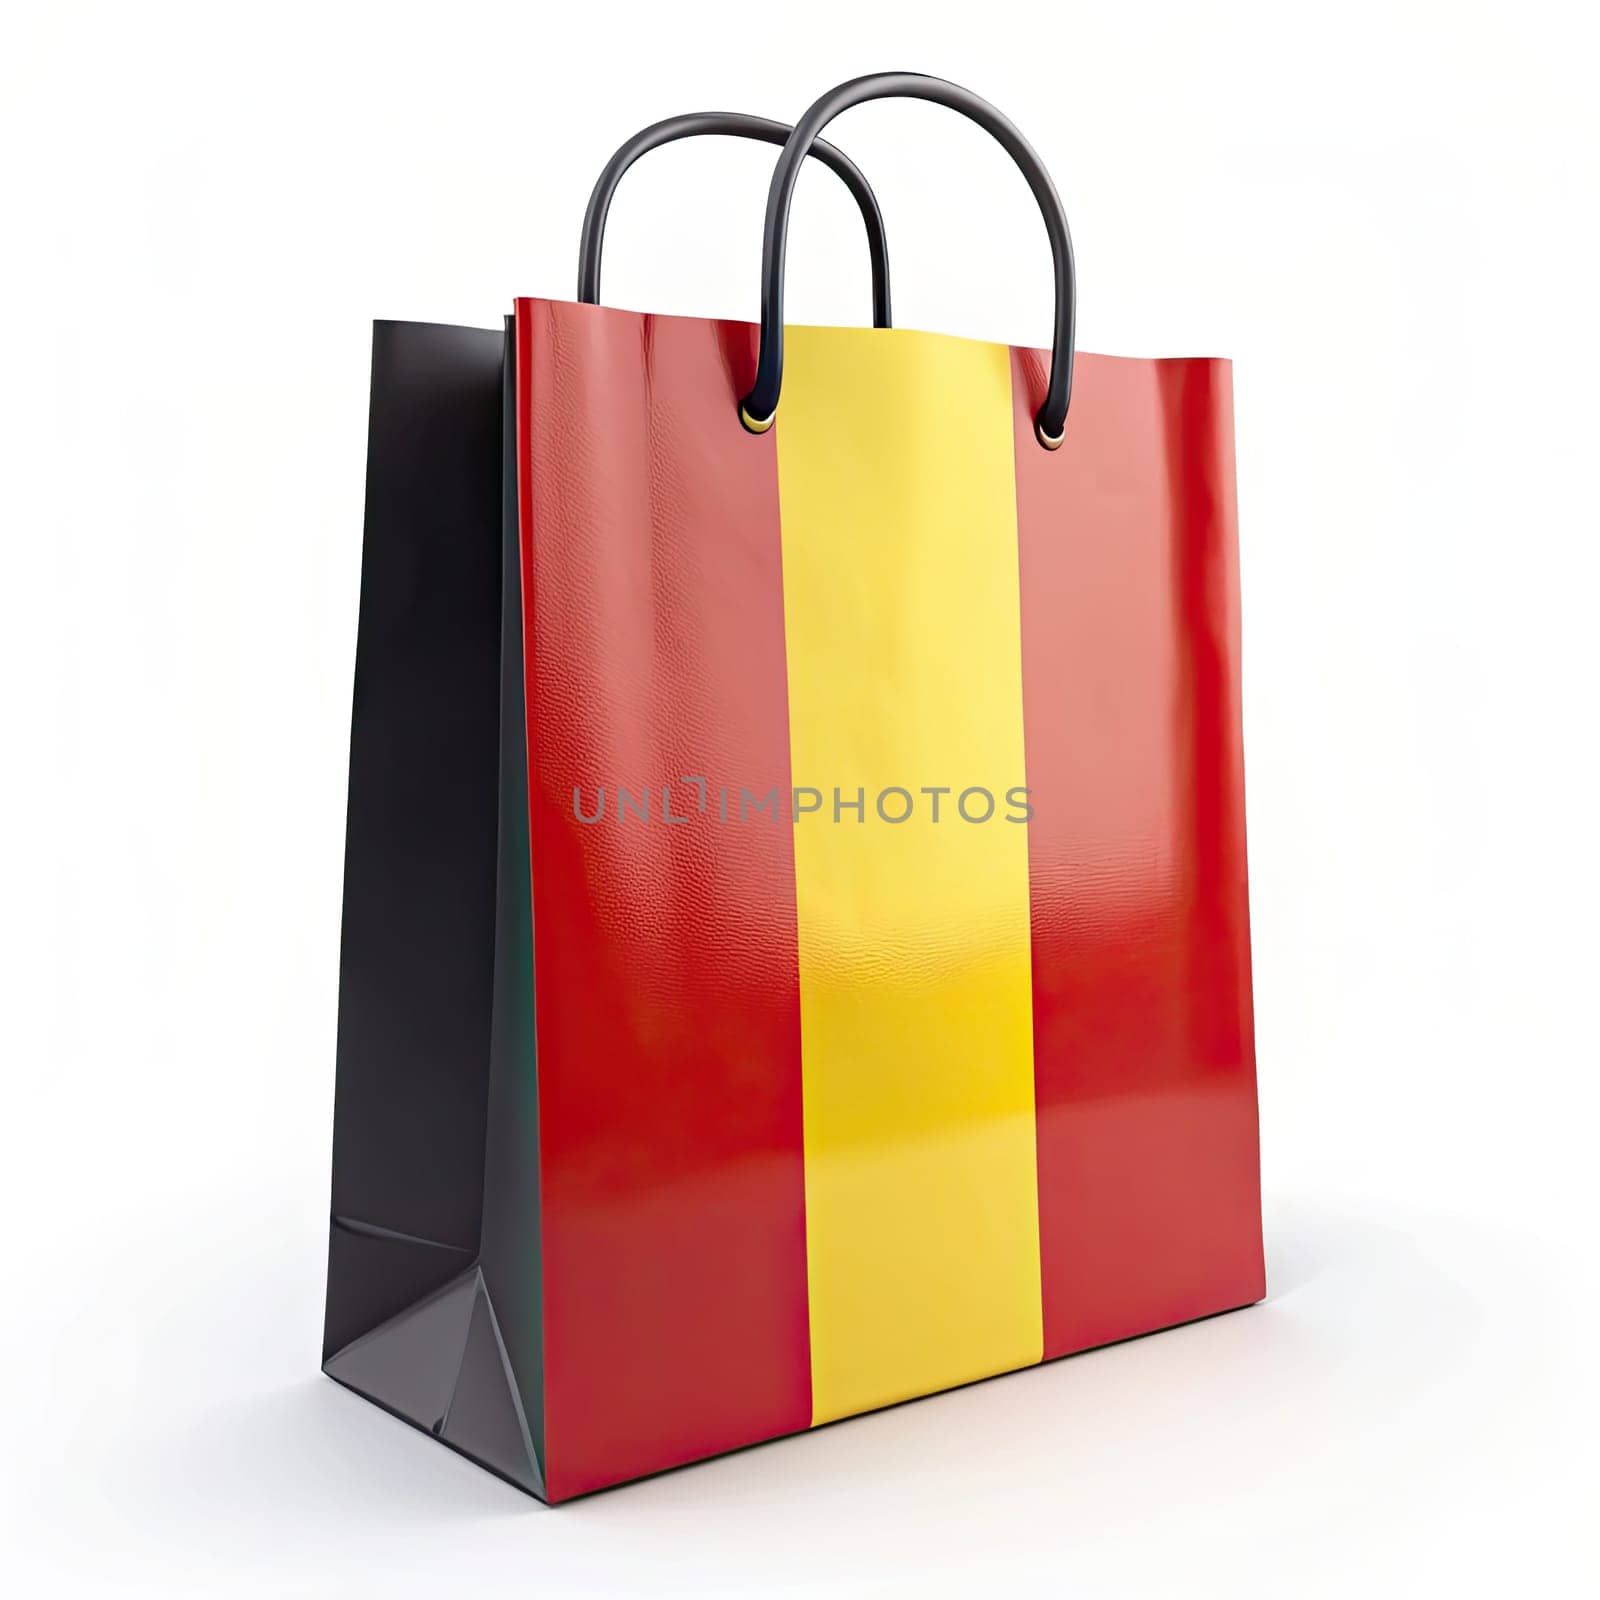 Belgium Flag Shopping Bag: Stylish Travel Accessory Against White Background. Premium Belgian Pride: Modern Flag-Inspired Tote Bag for Sustainable Fashionistas. Iconic Belgian Heritage: Durable Flag Shopping Bag for Trendy Outings by Andrii_Ko